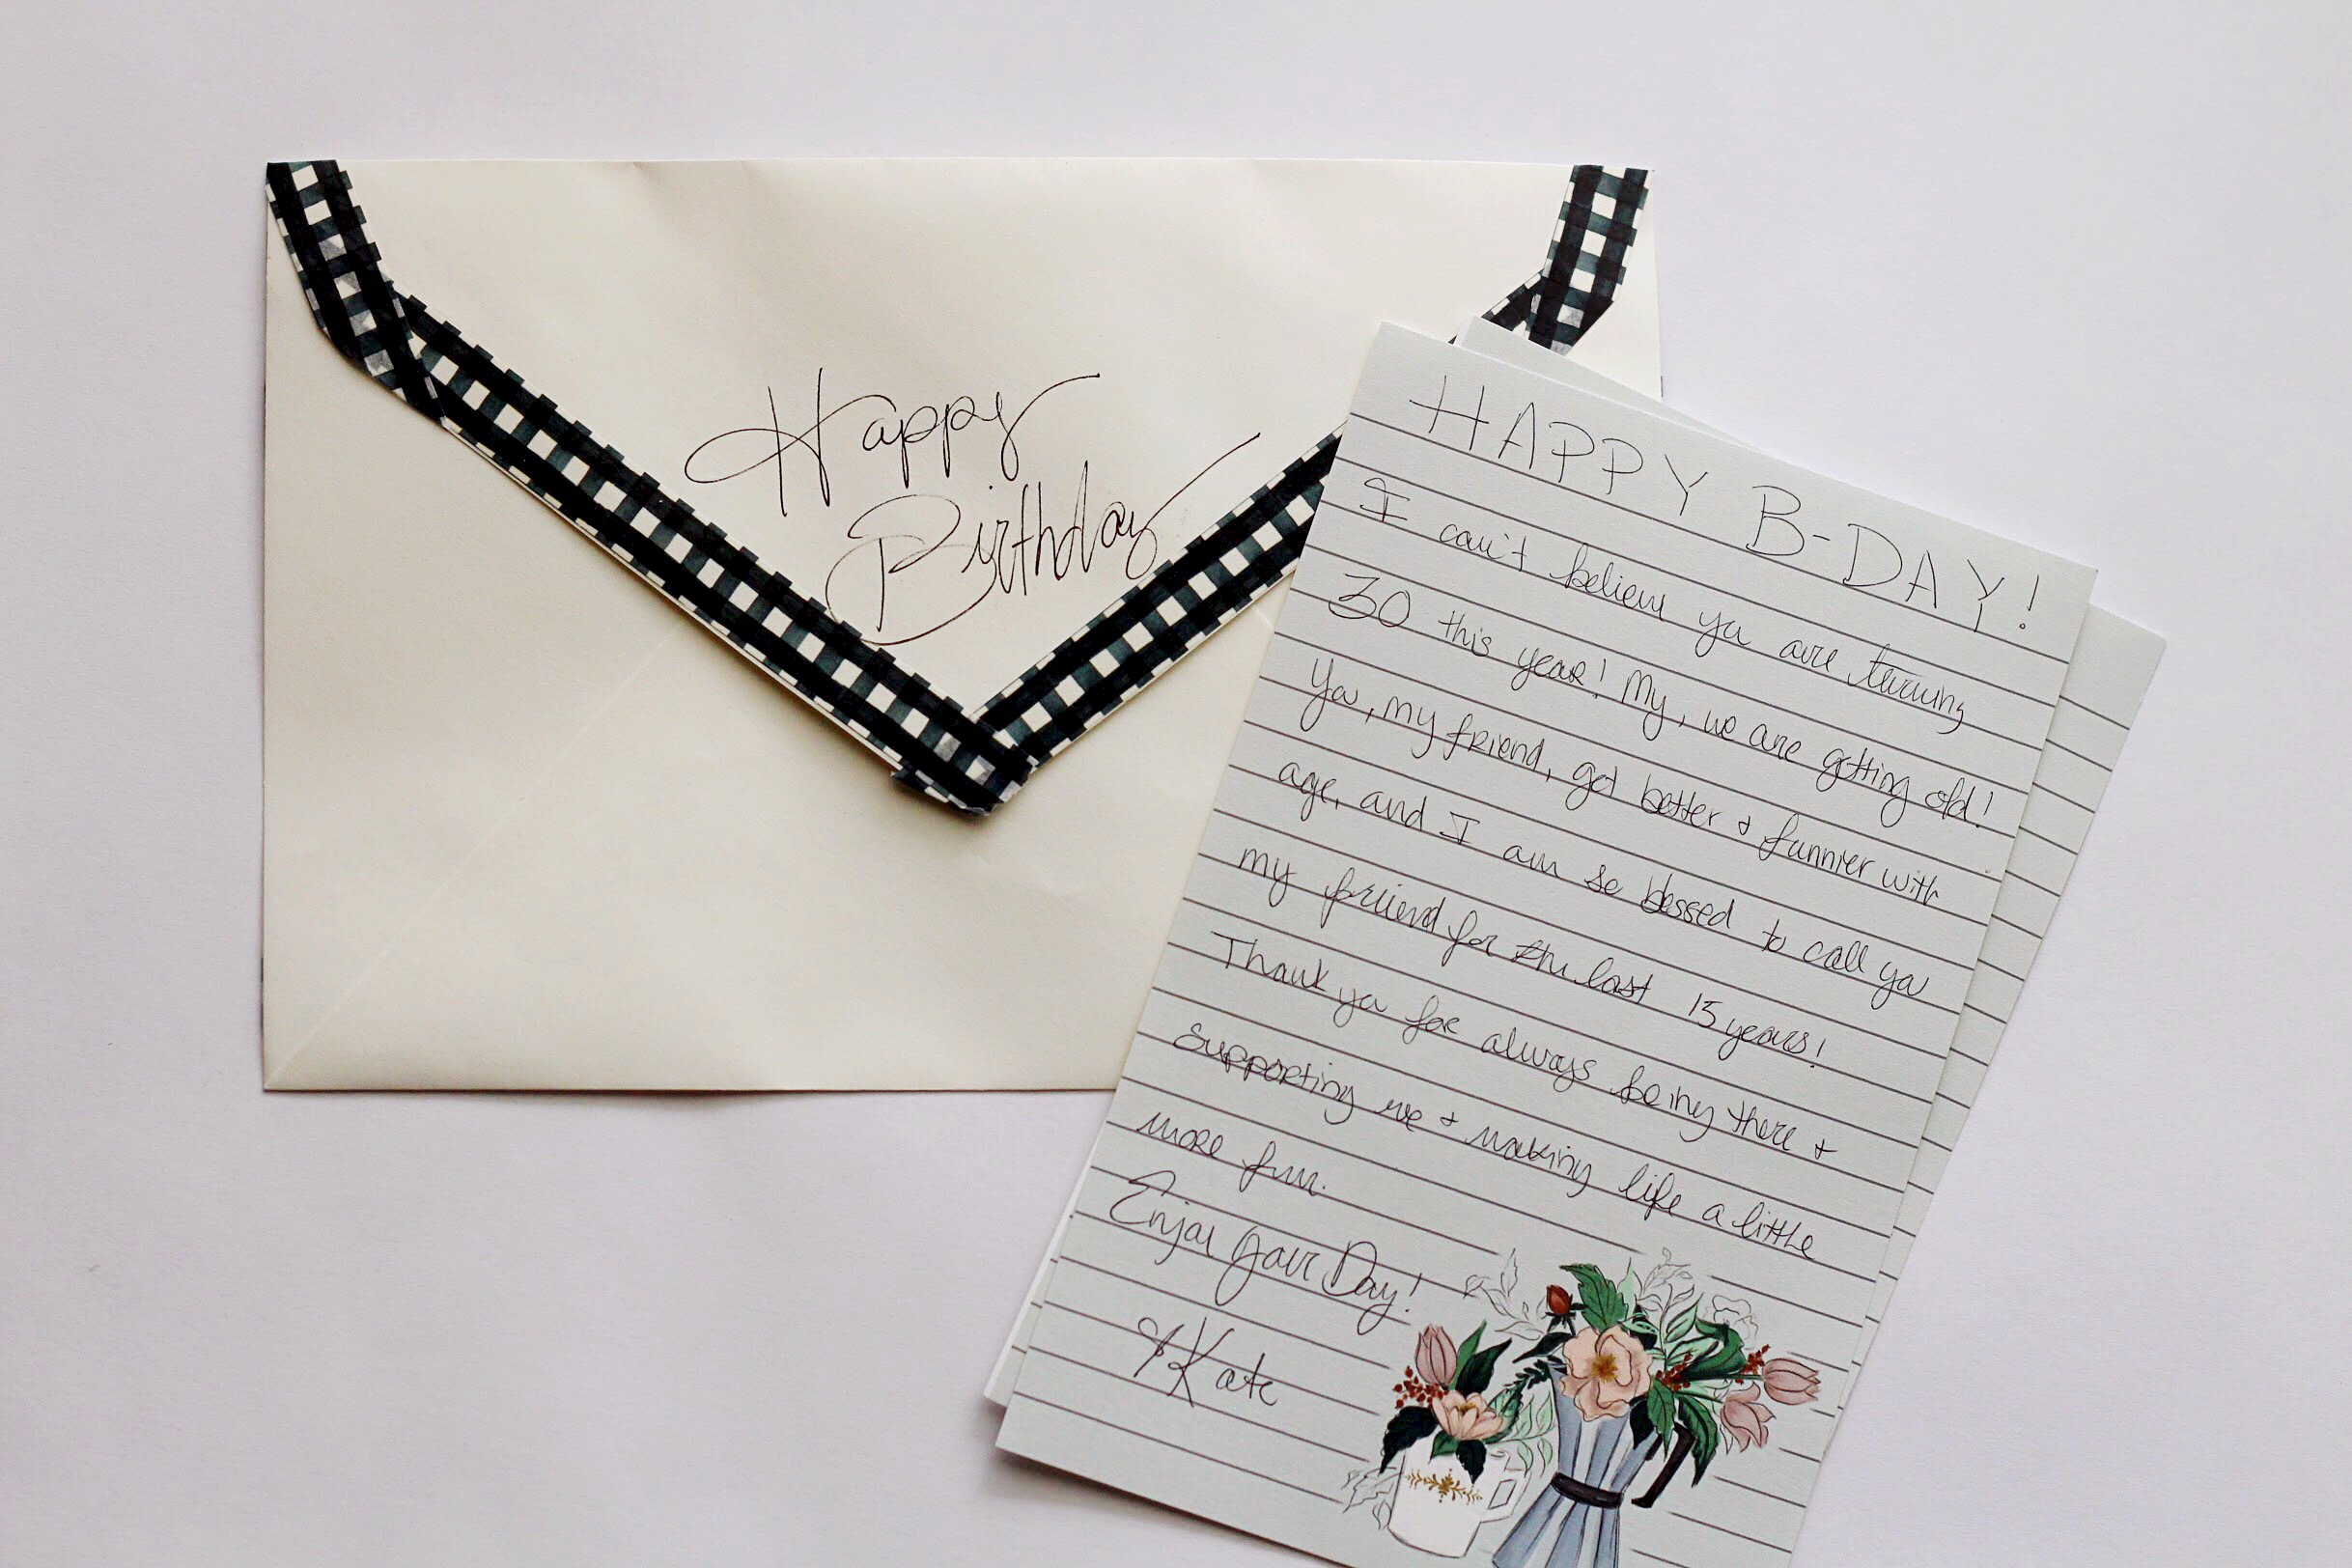 Diy Envelope Decorating with stationery sheets